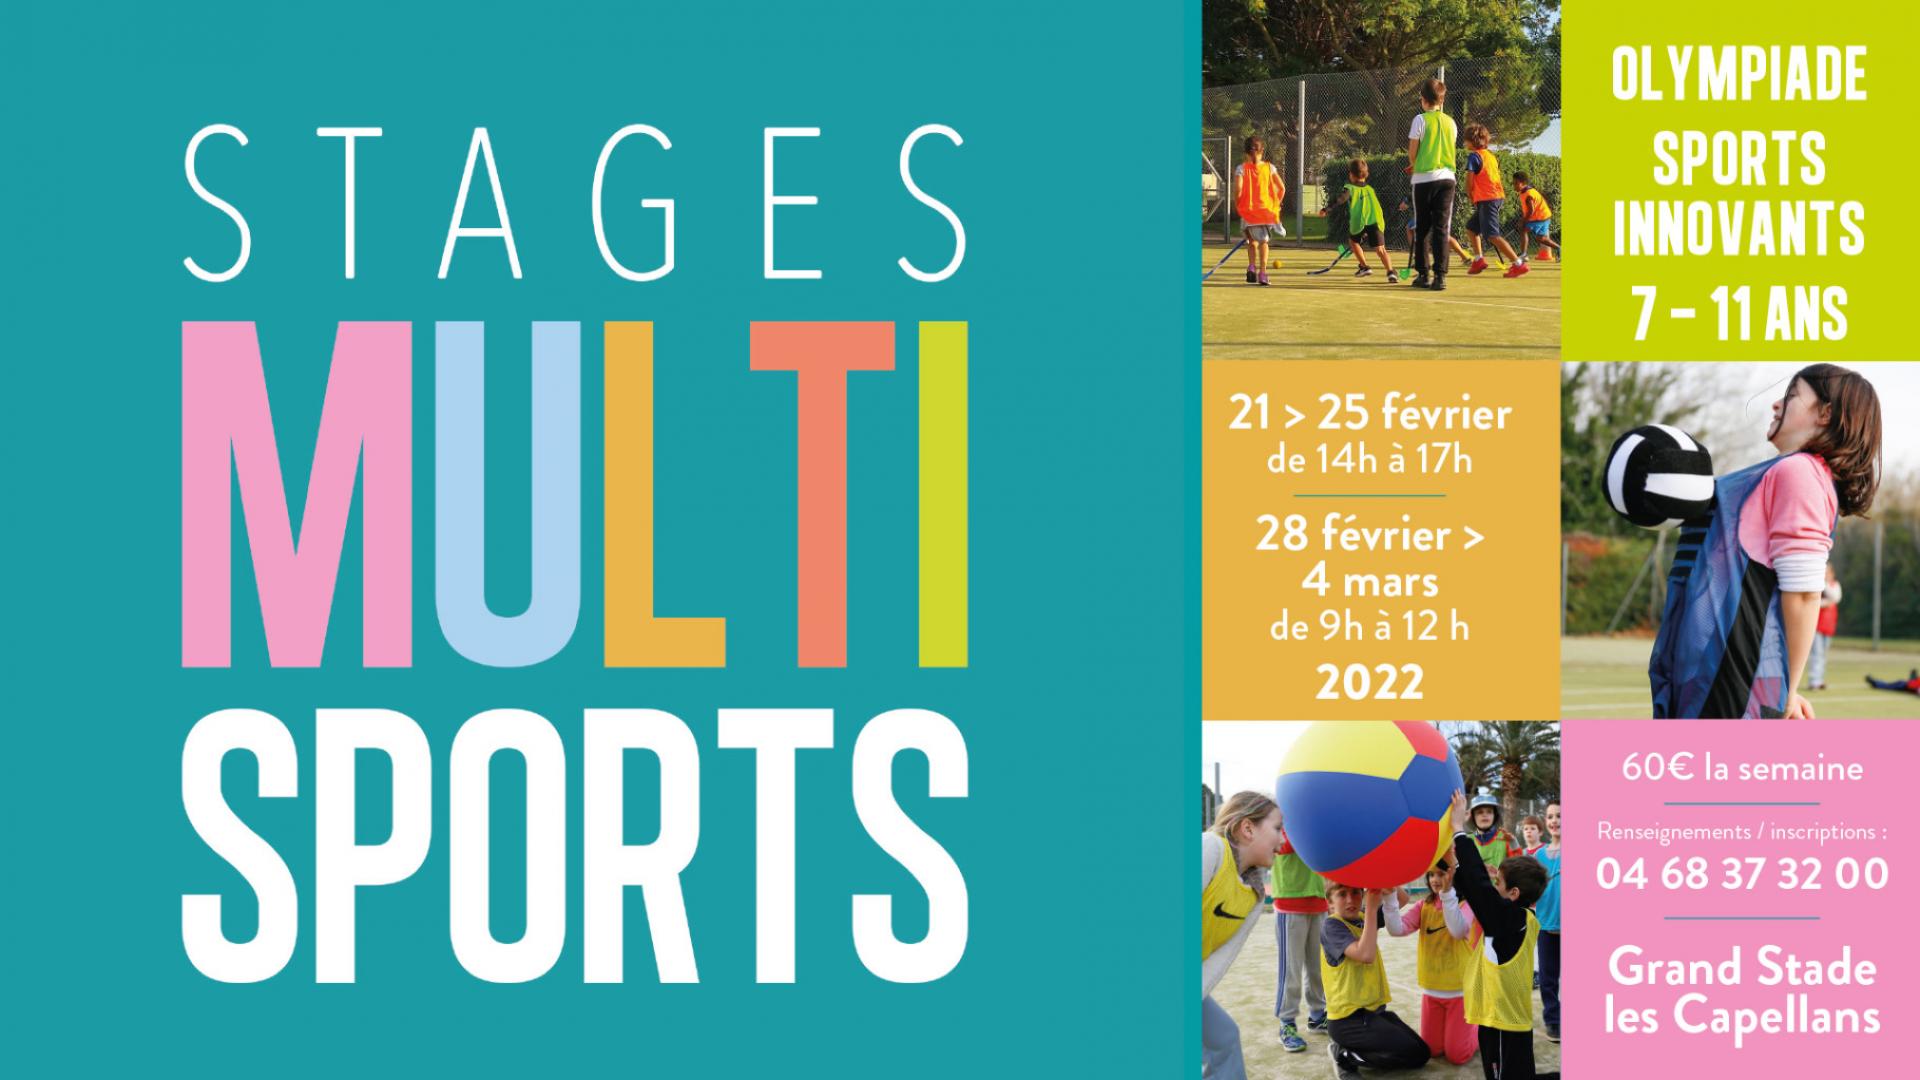 STAGES MULTI-SPORTS